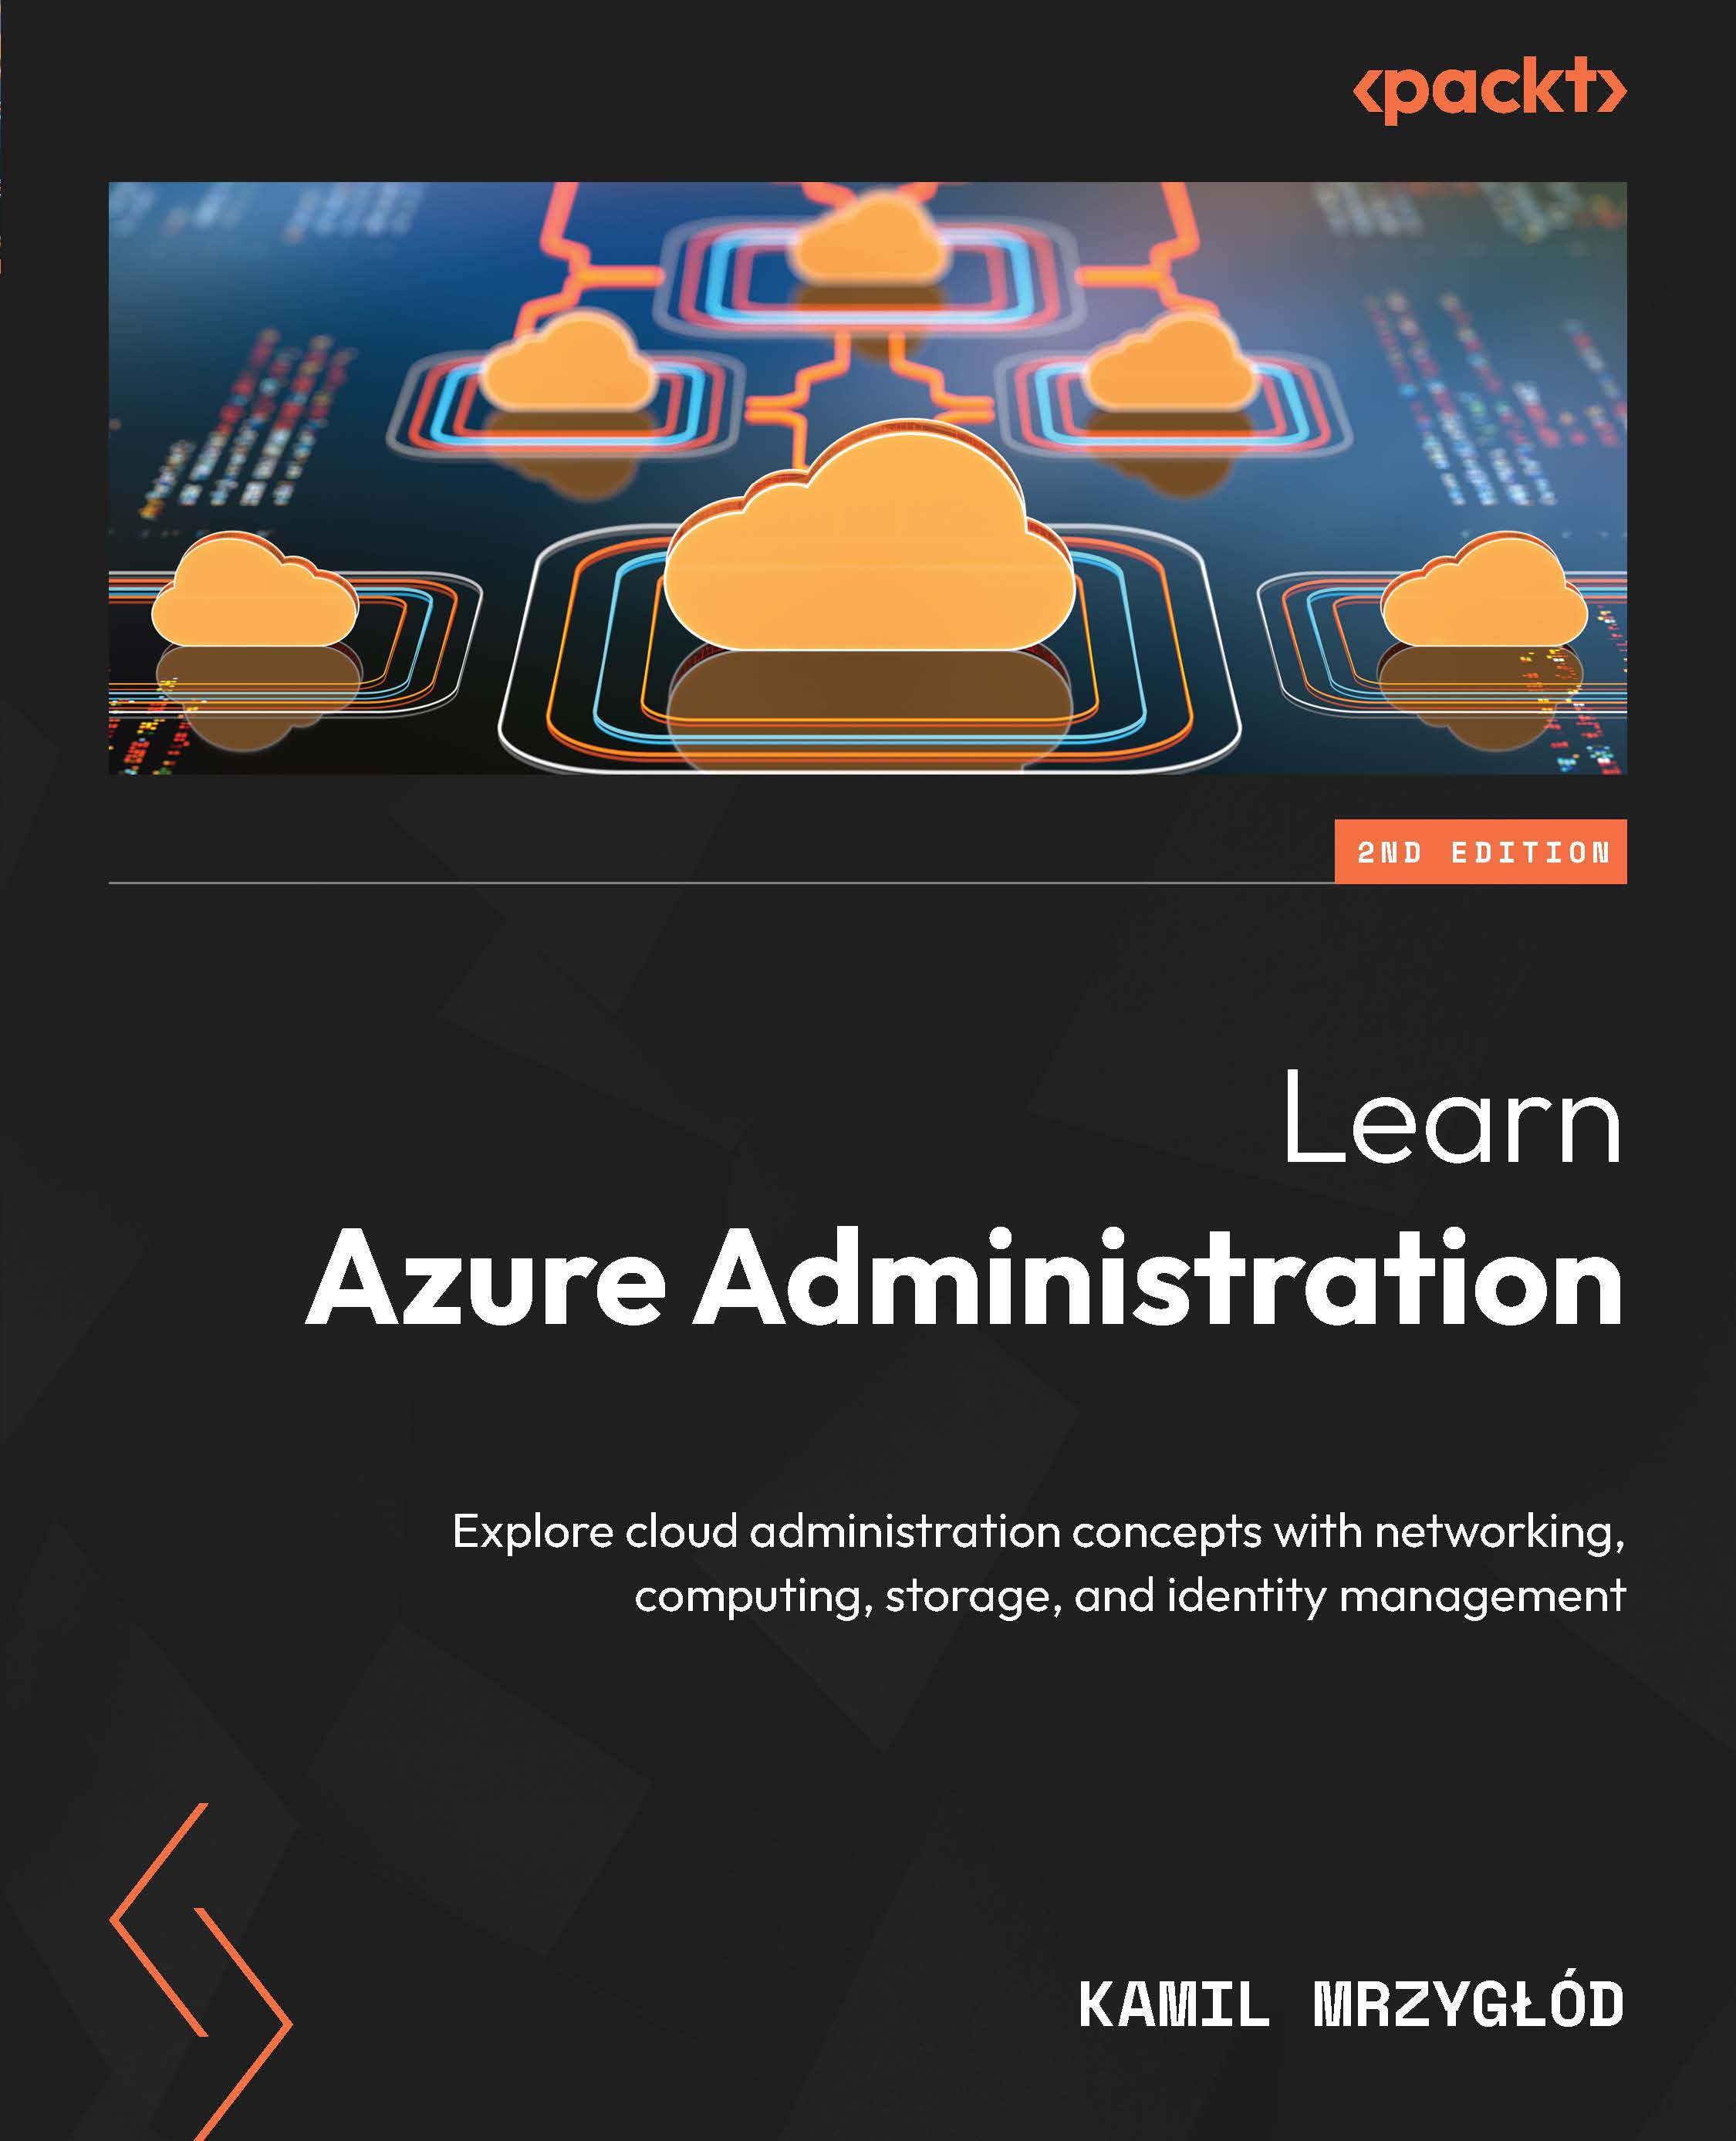 Learn Azure Administration